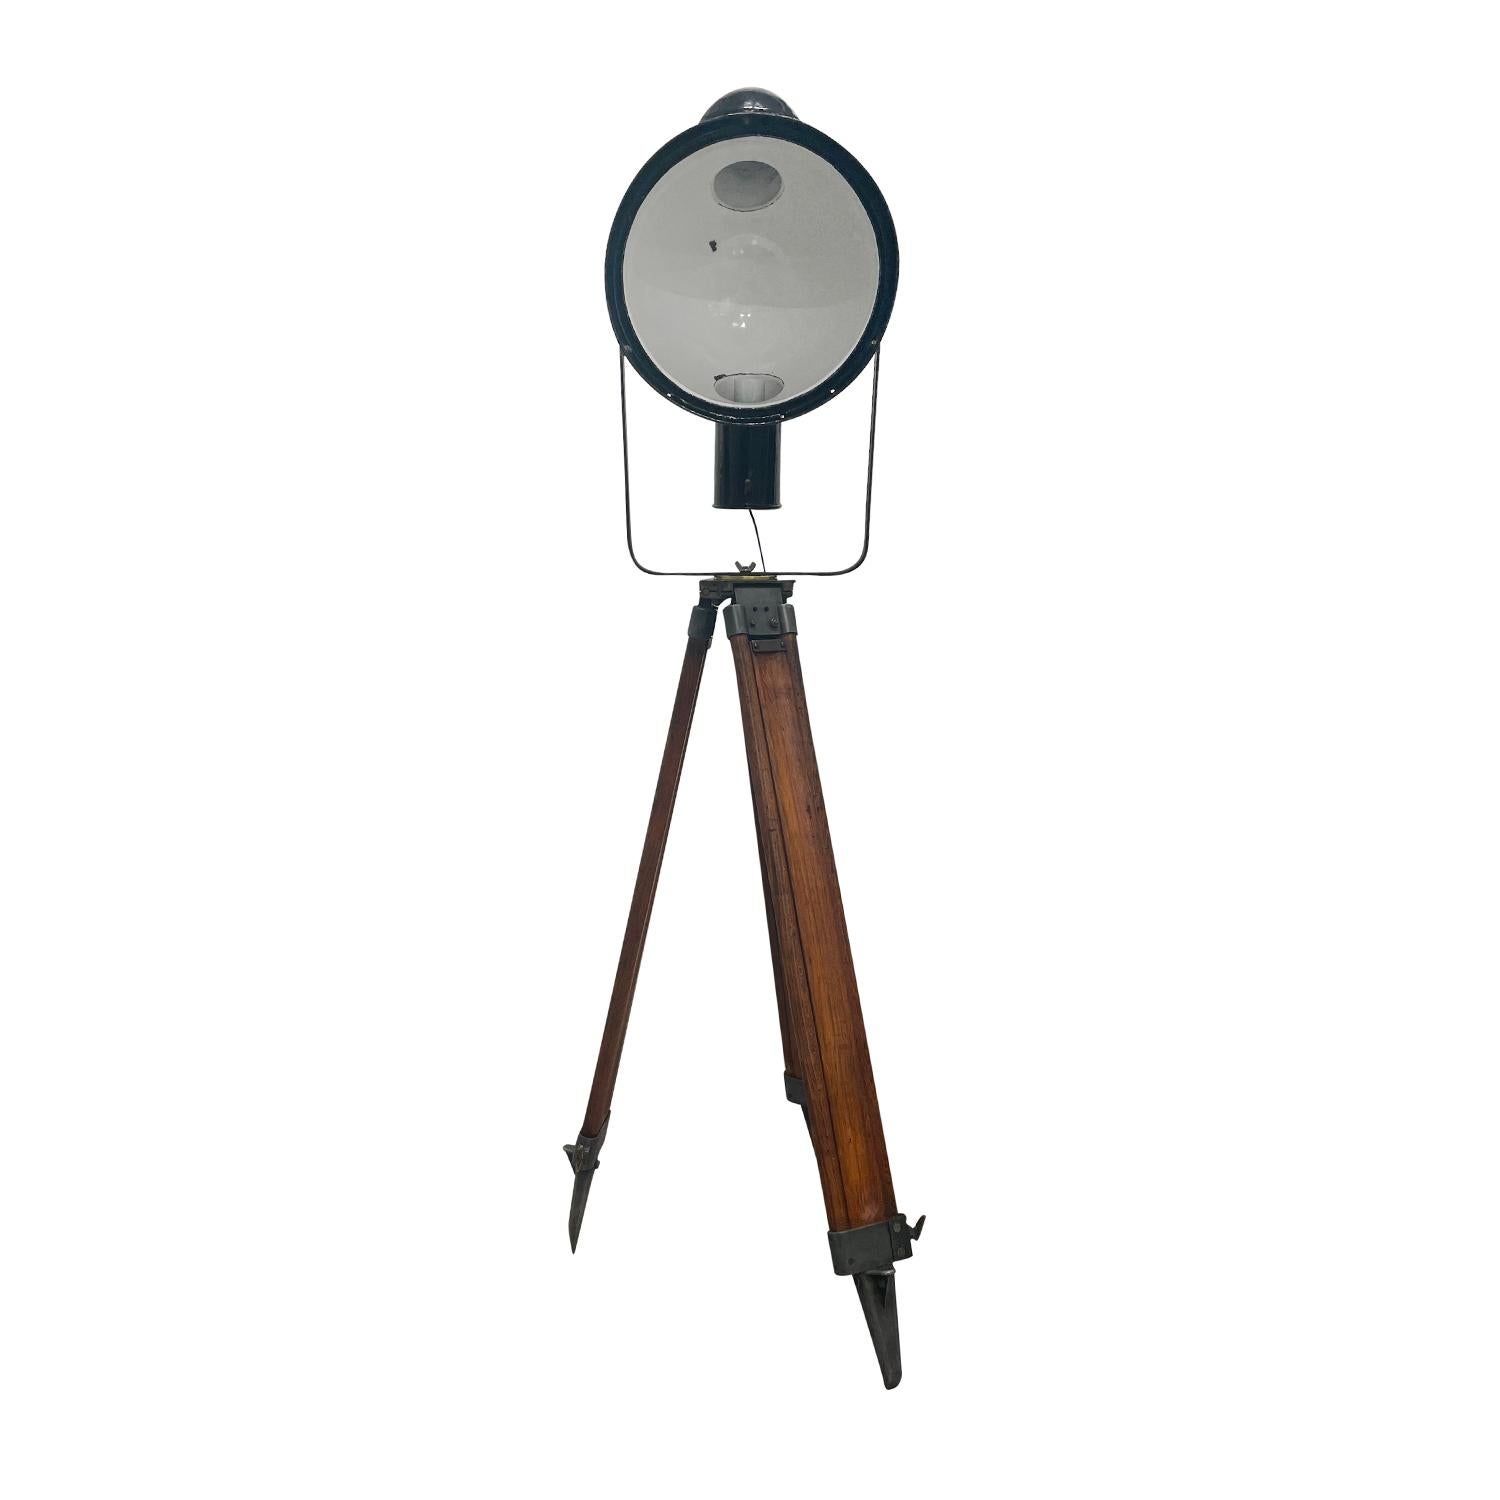 A black, vintage Industrial Style French spotlight made of hand crafted painted metal, in good condition. The detailed Parisian cinema floor studio lamp features a single light socket, consisting its original hardware, standing on an adjustable